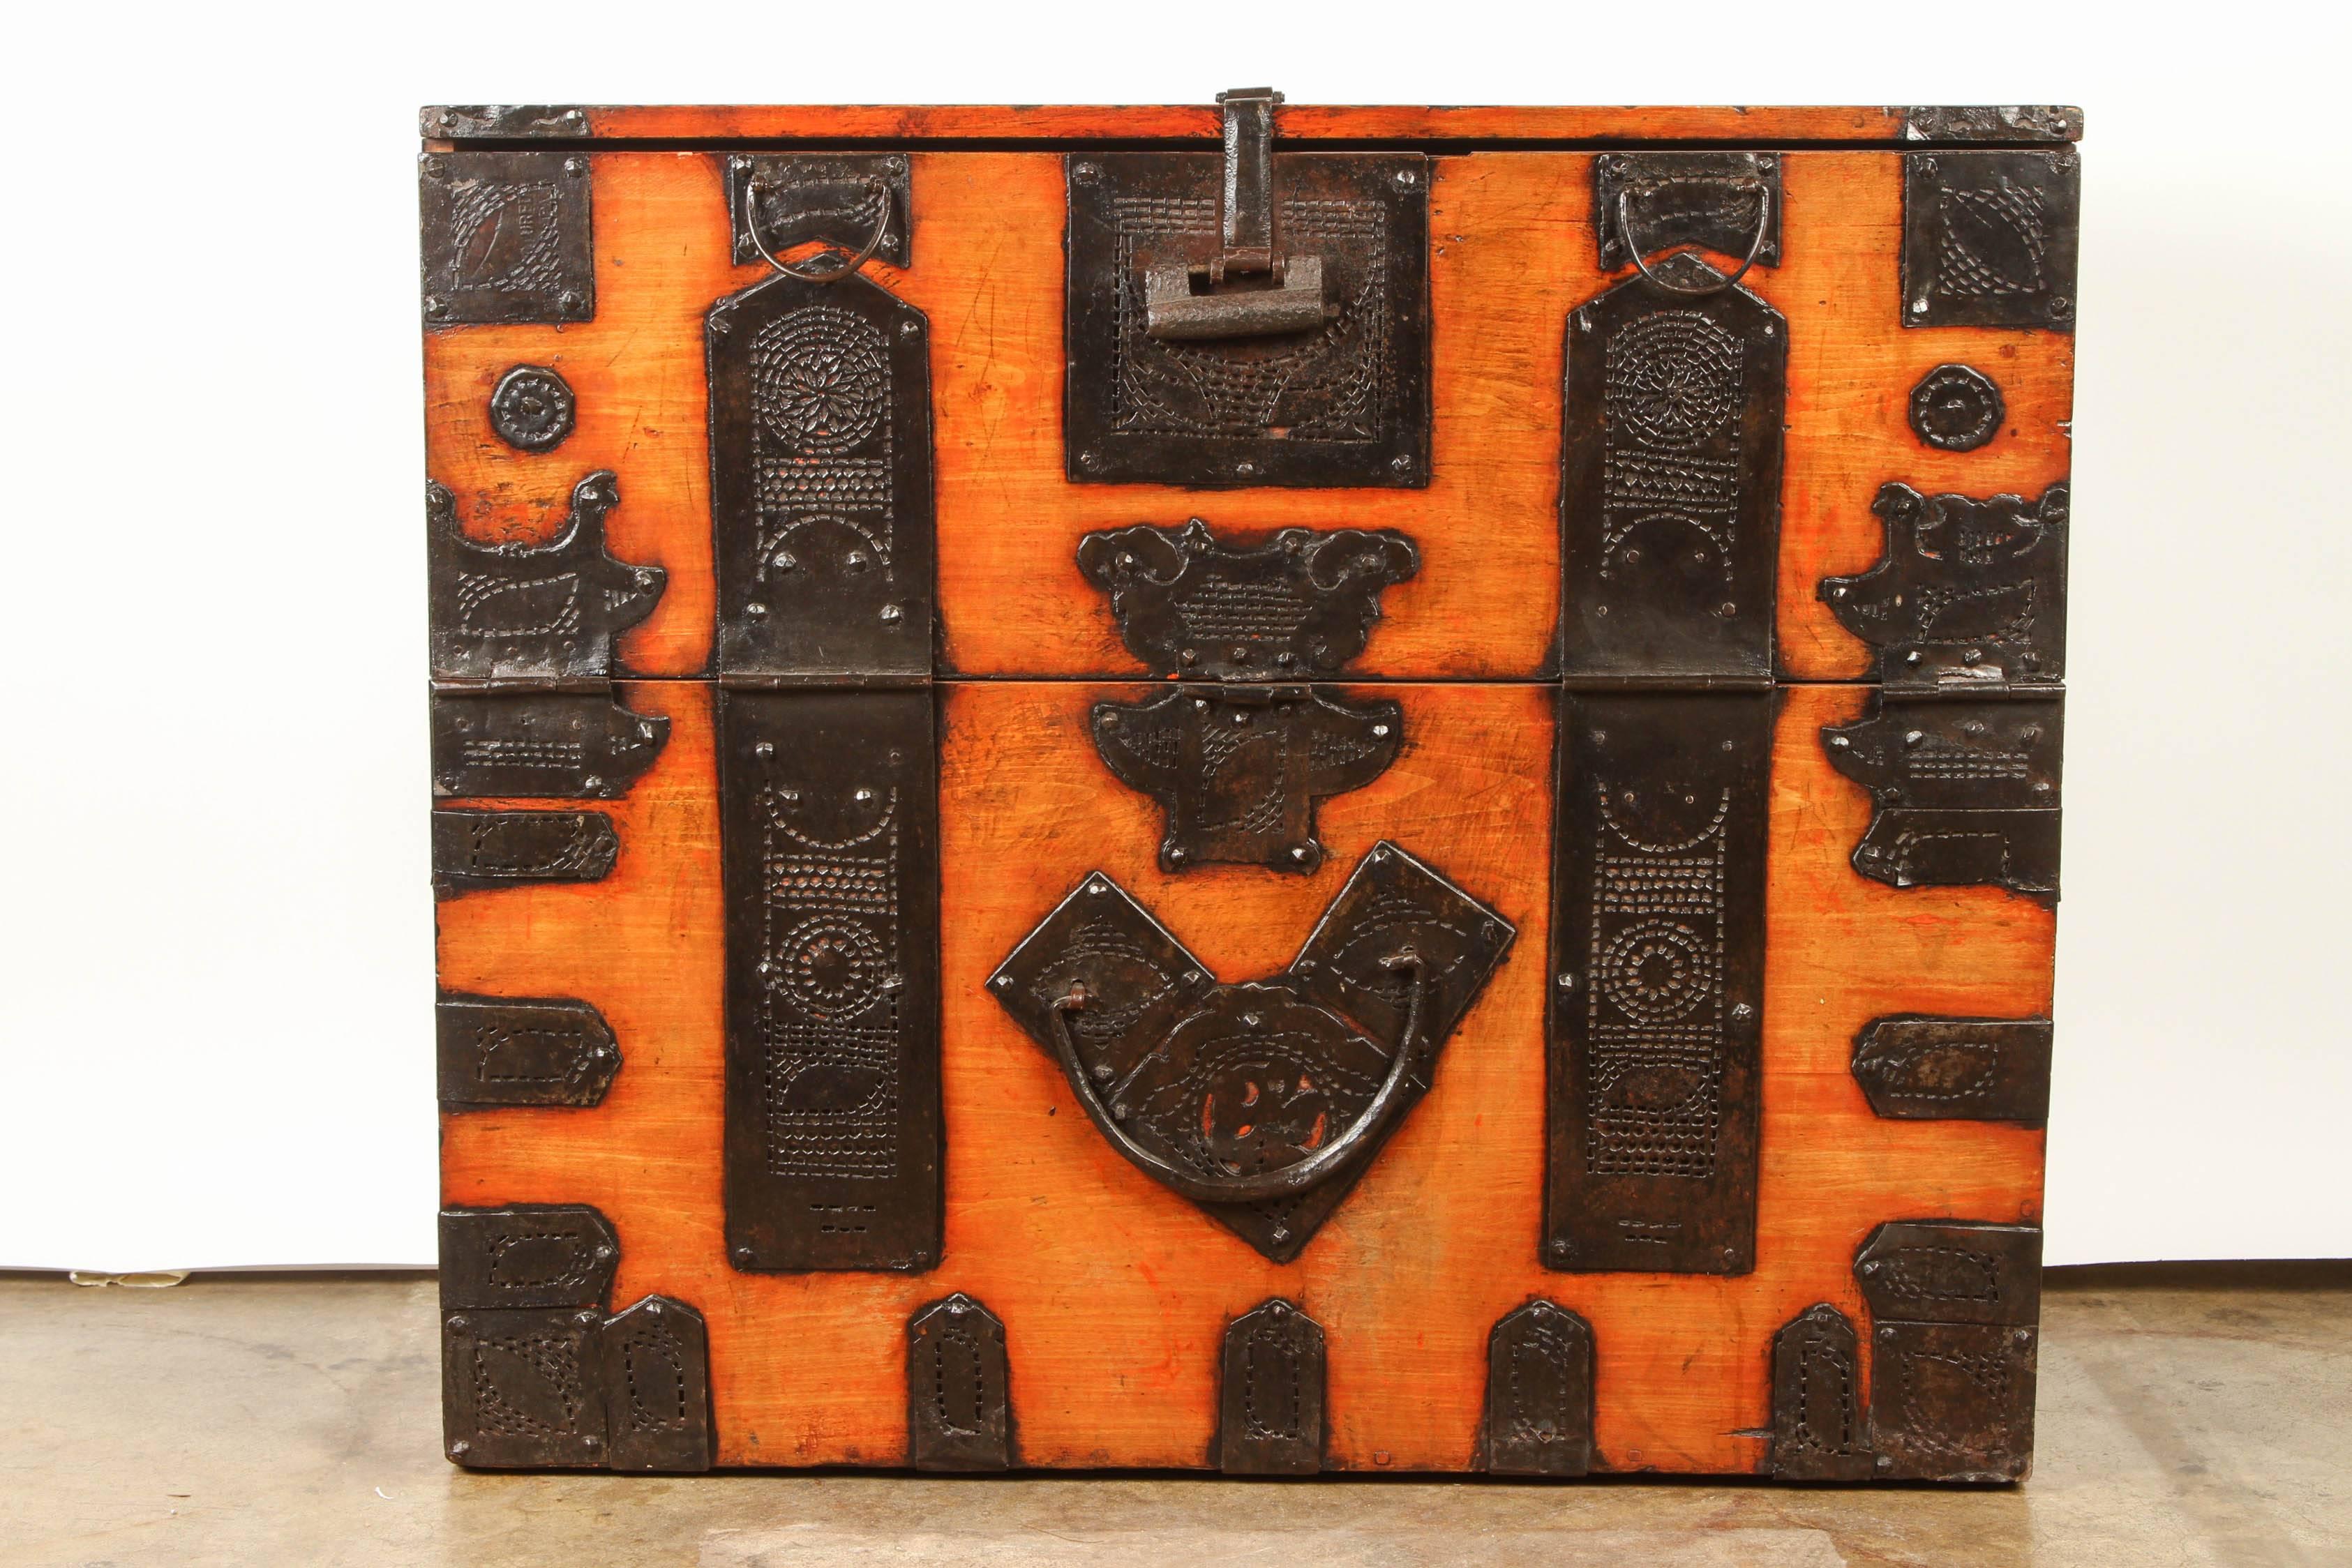 Korean drop front chest. The original dark lacquer has mellowed to an attractive orange and red. Covered with black metal strapping and decorated metal.